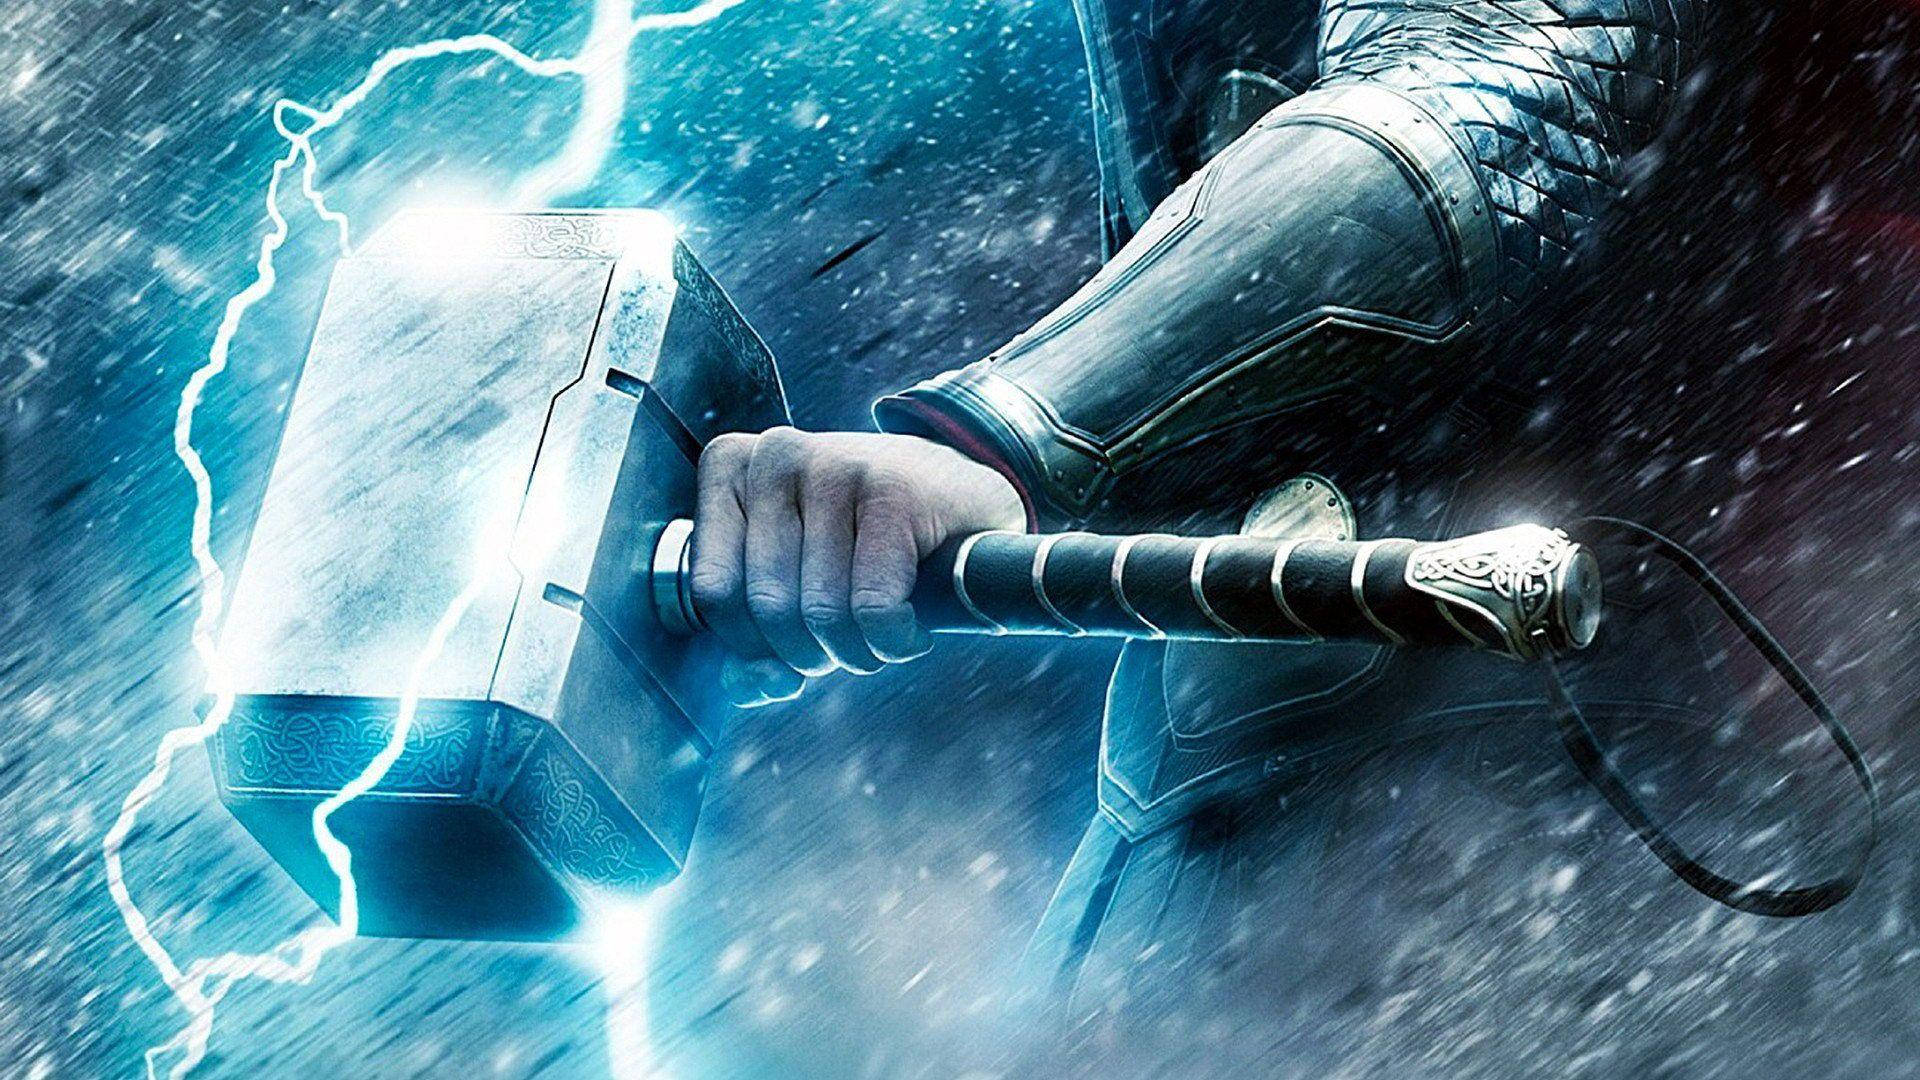 Thor Hammer And His Armored Hand Wallpaper